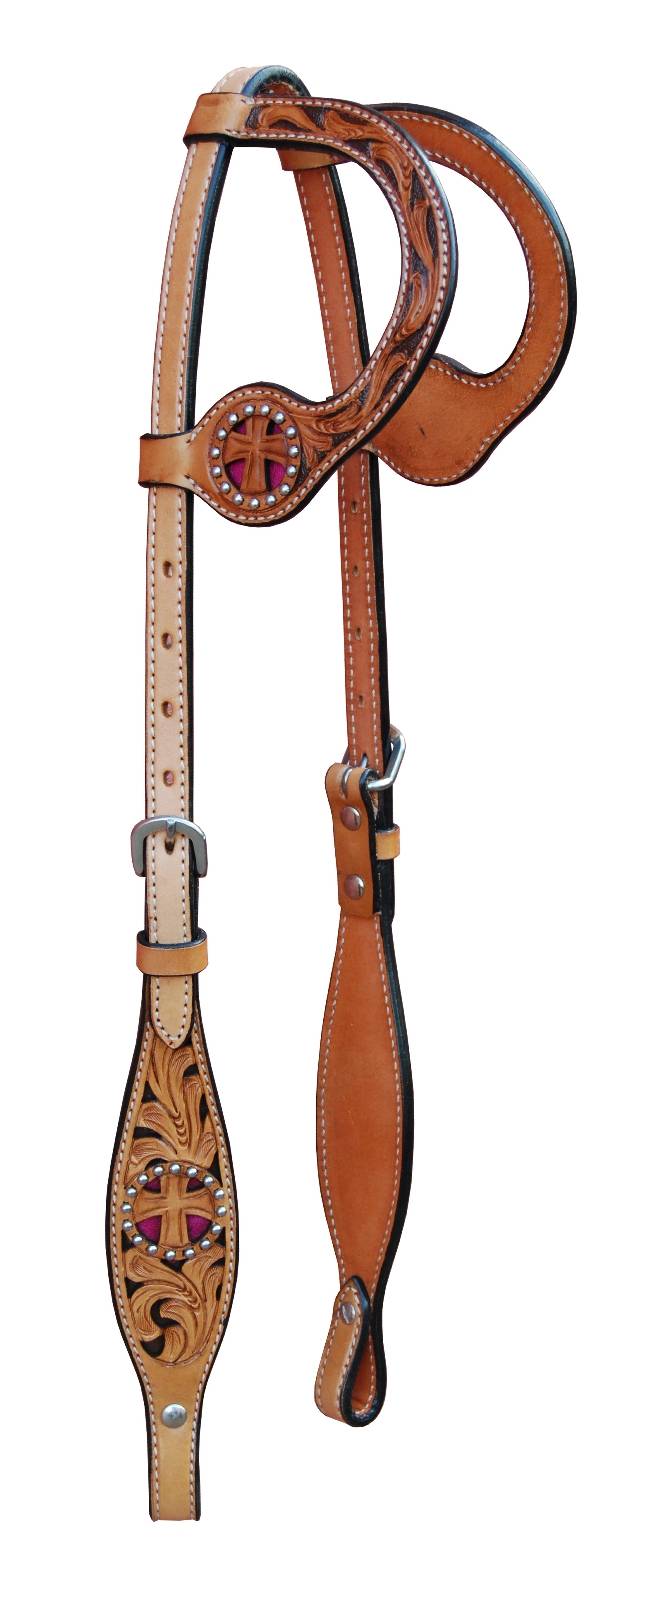 468923PINK HRSE Turn-Two Double Ear Headstall - St. Christopher sku 468923PINK HRSE